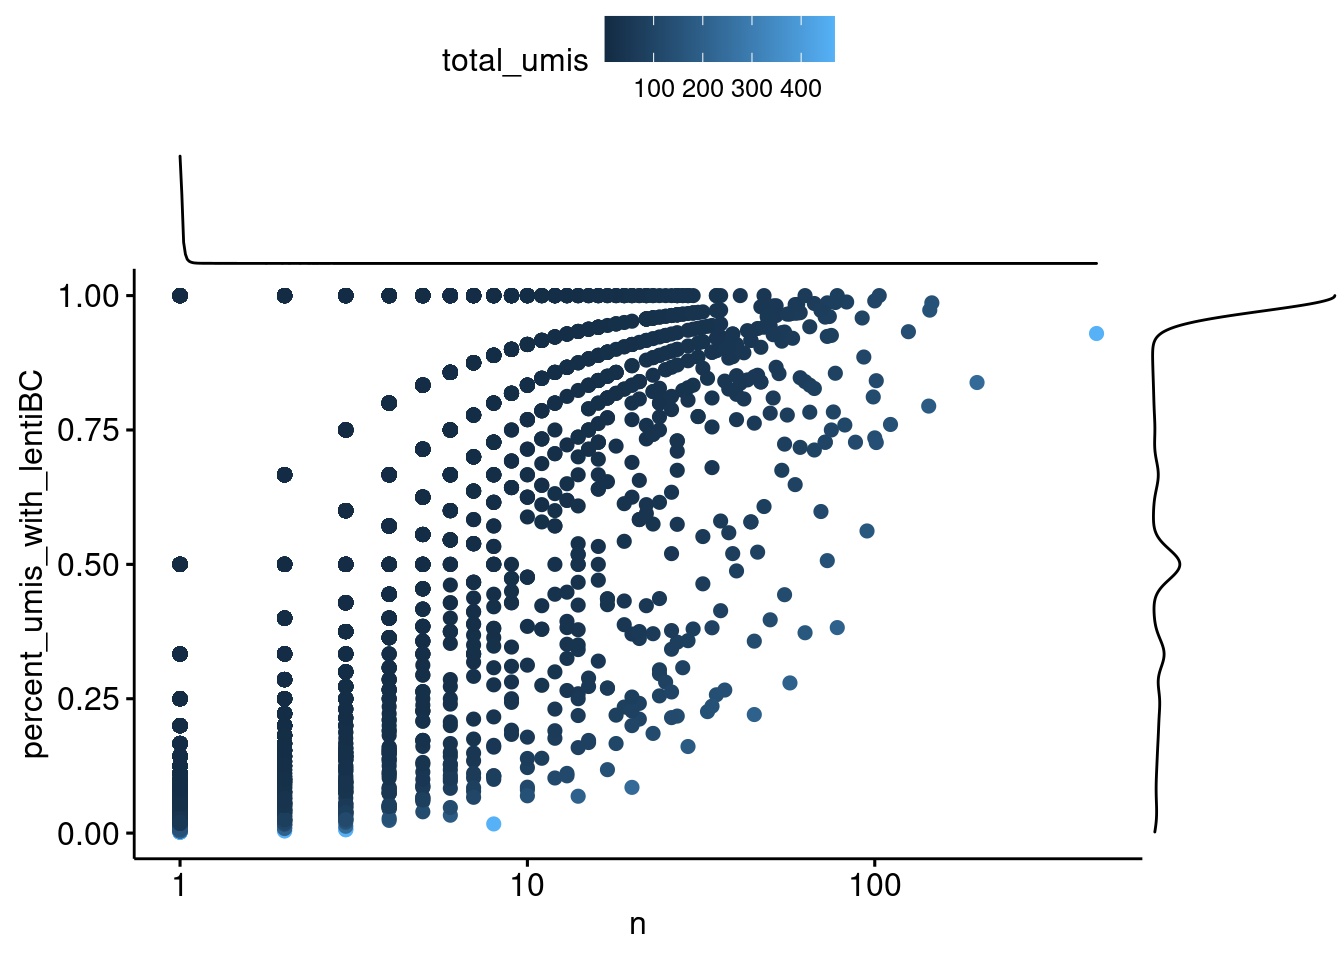 Capture4: Each point is a cell-lenti barcode pair. The x-axis is the number of umi supporting that pair. The y-axis is the percent of the total number of umi for the cell barcode that represents, where a 1 means that all umis from that cell have the same lenti barcode.